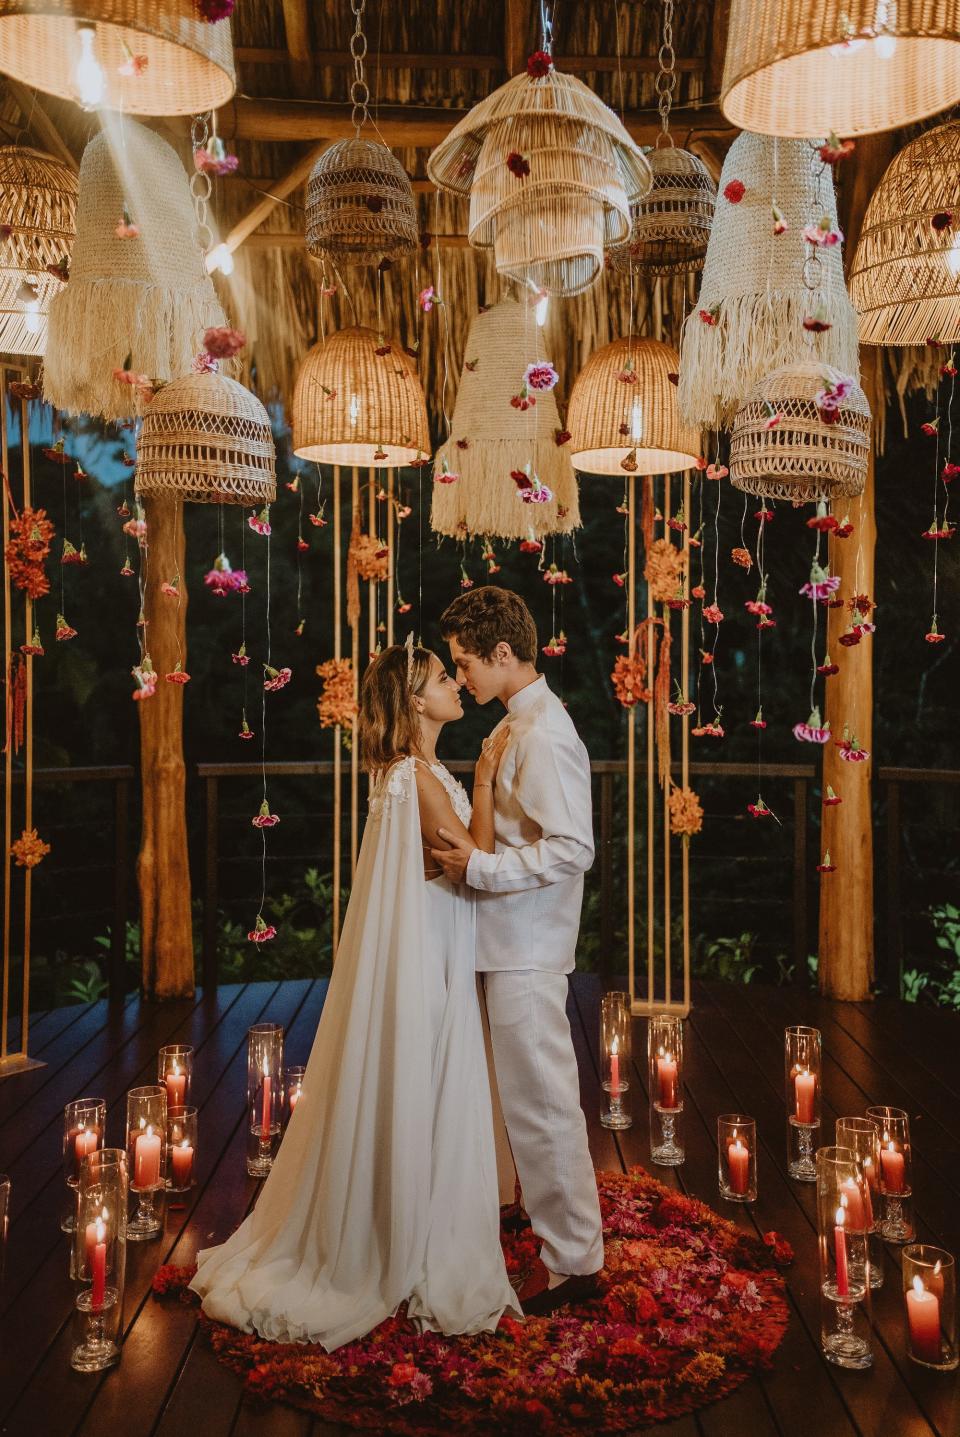 A bride and groom look at each other in a room full of flowers and candles.